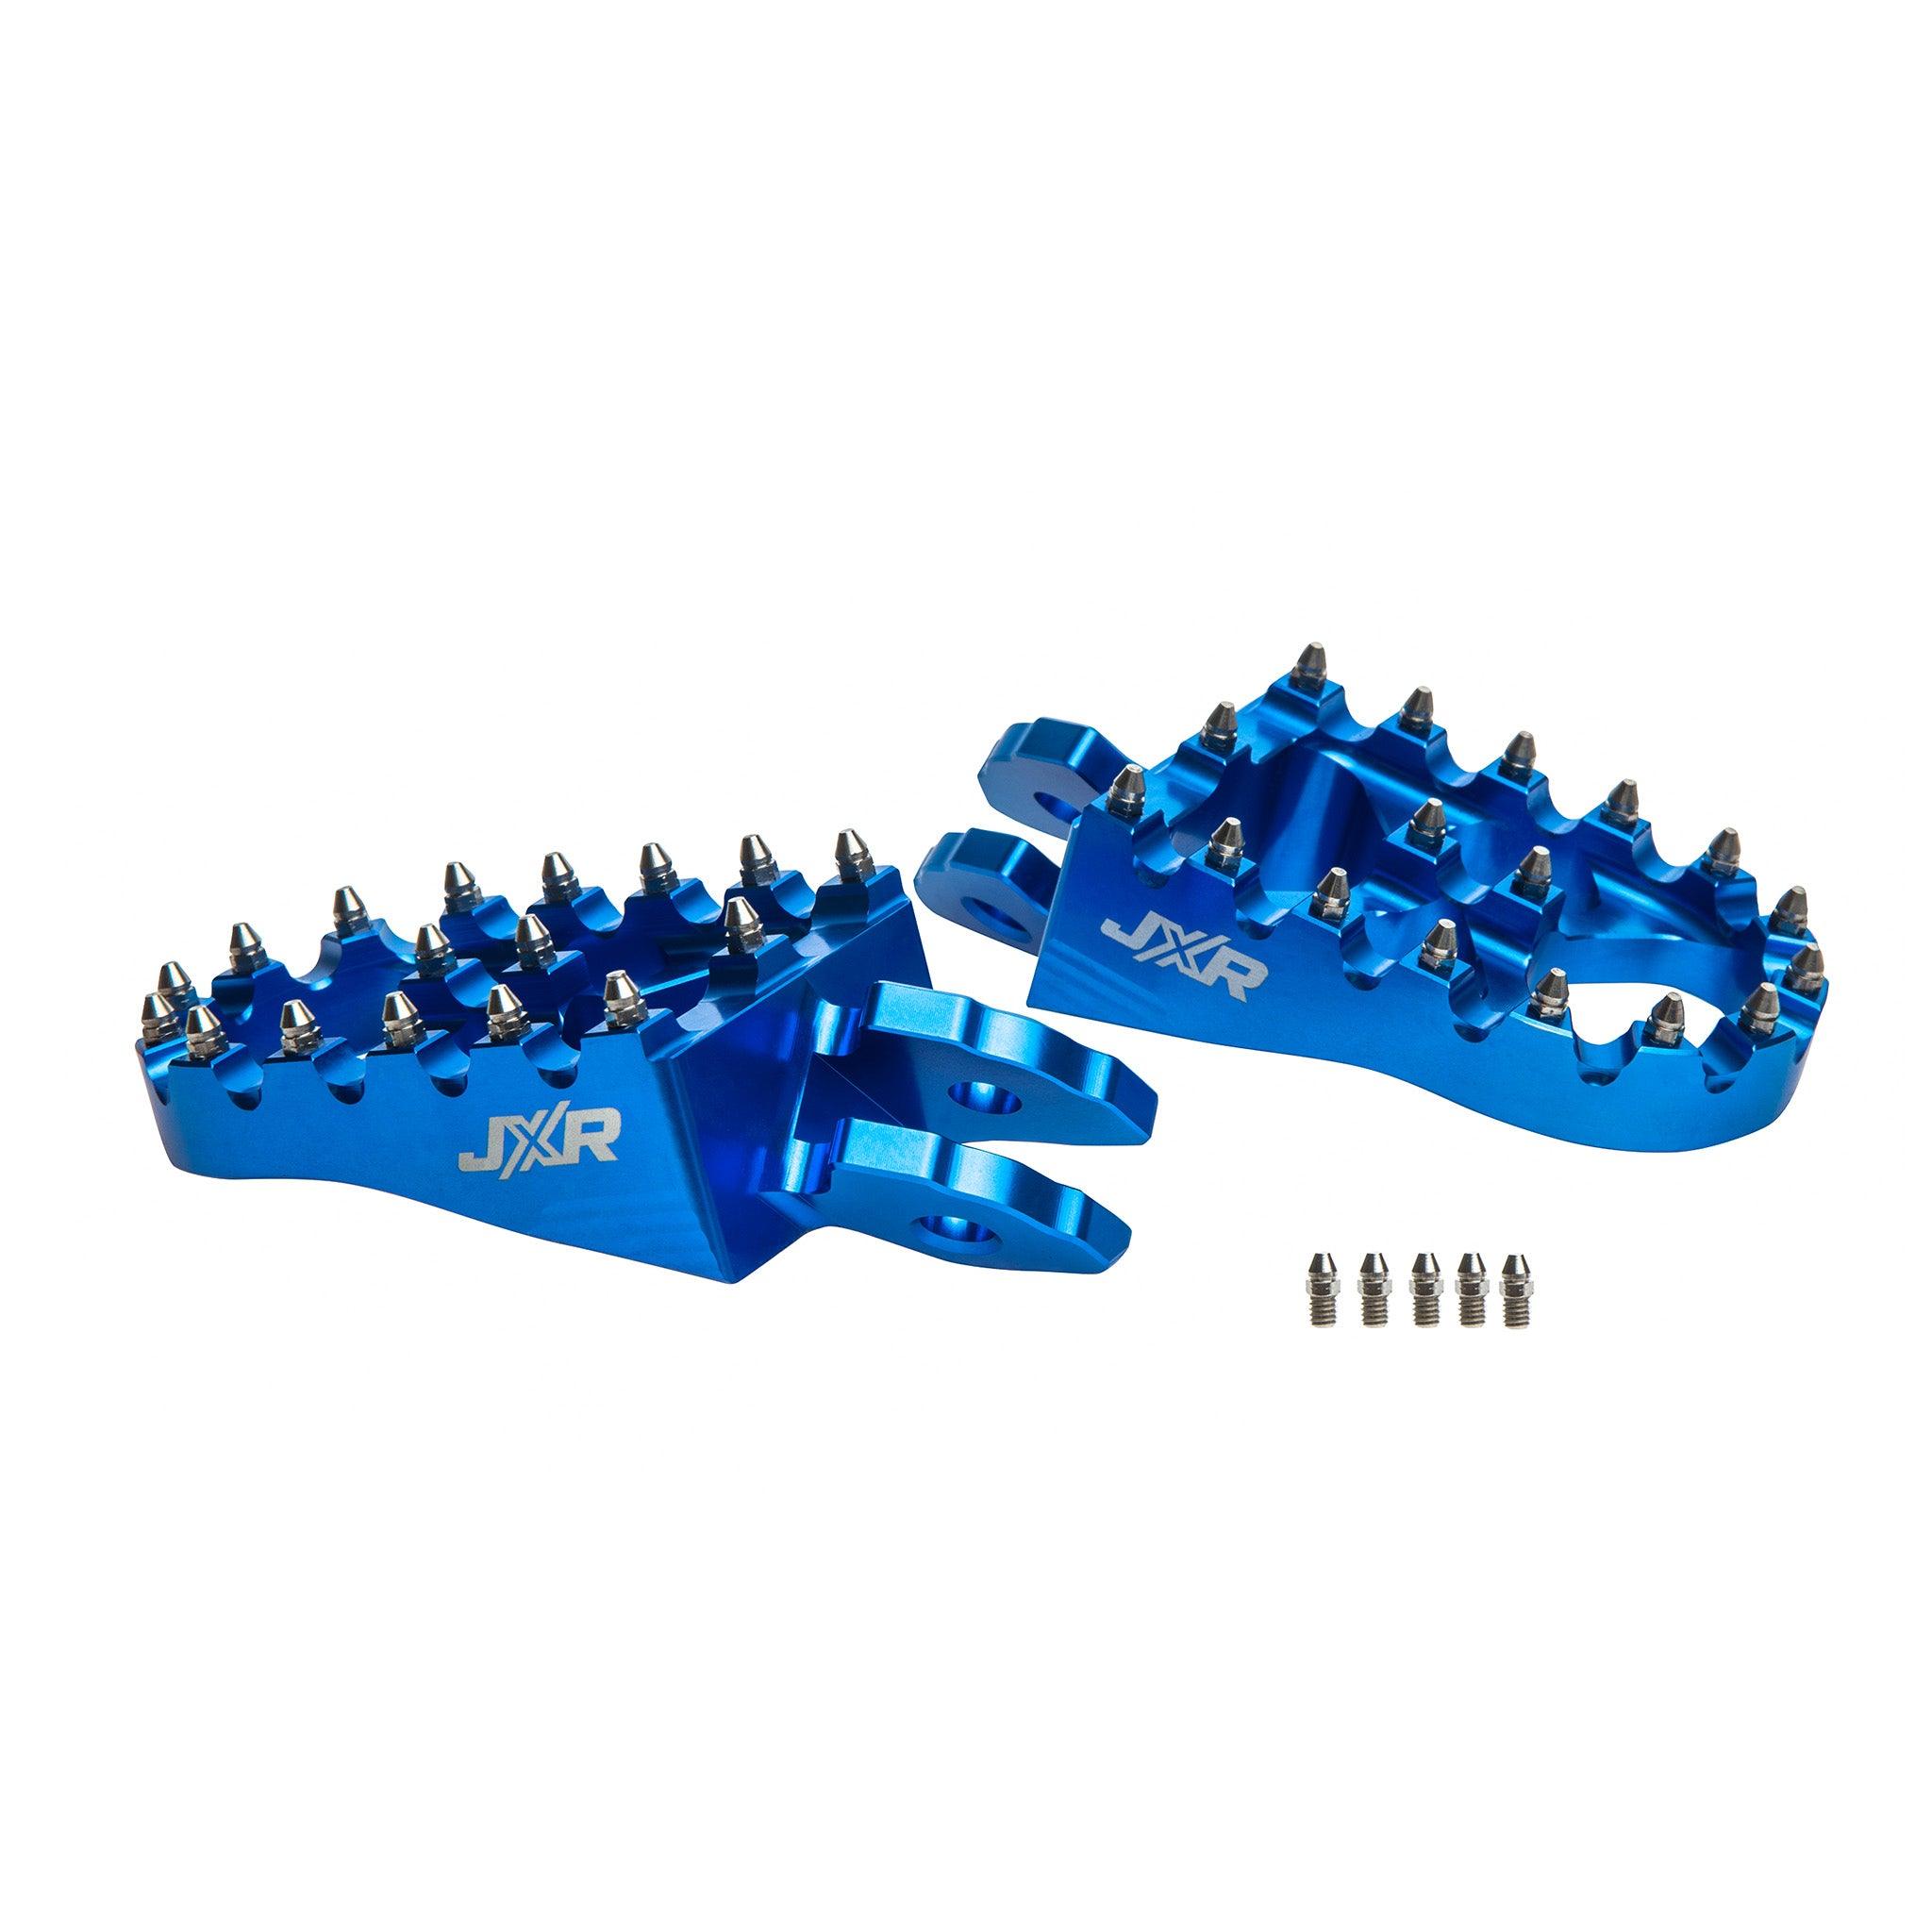 Footpegs for Surron Light Bee anodized blue